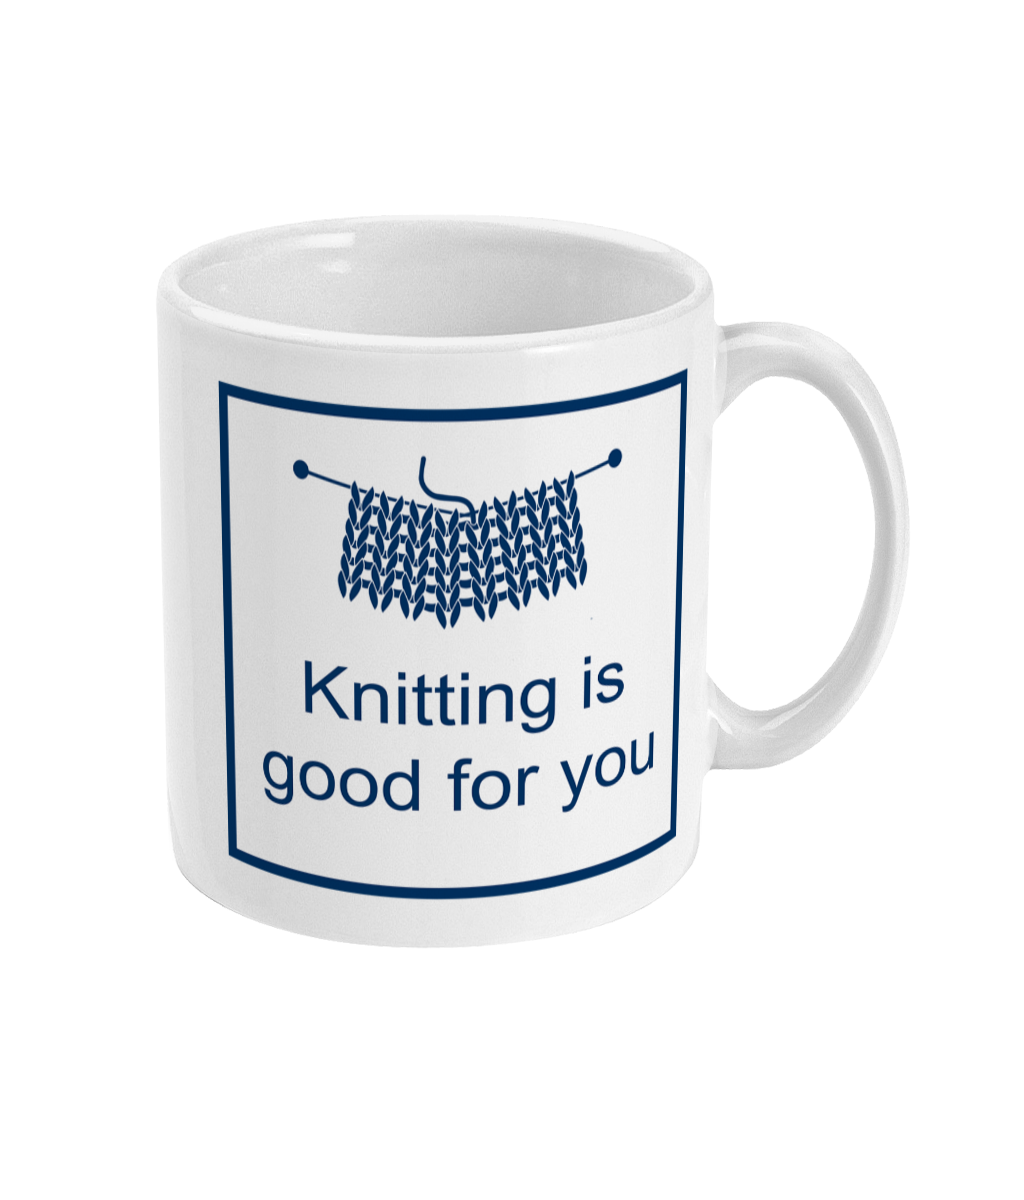 knitting is good for you printed on a mug with some knitting